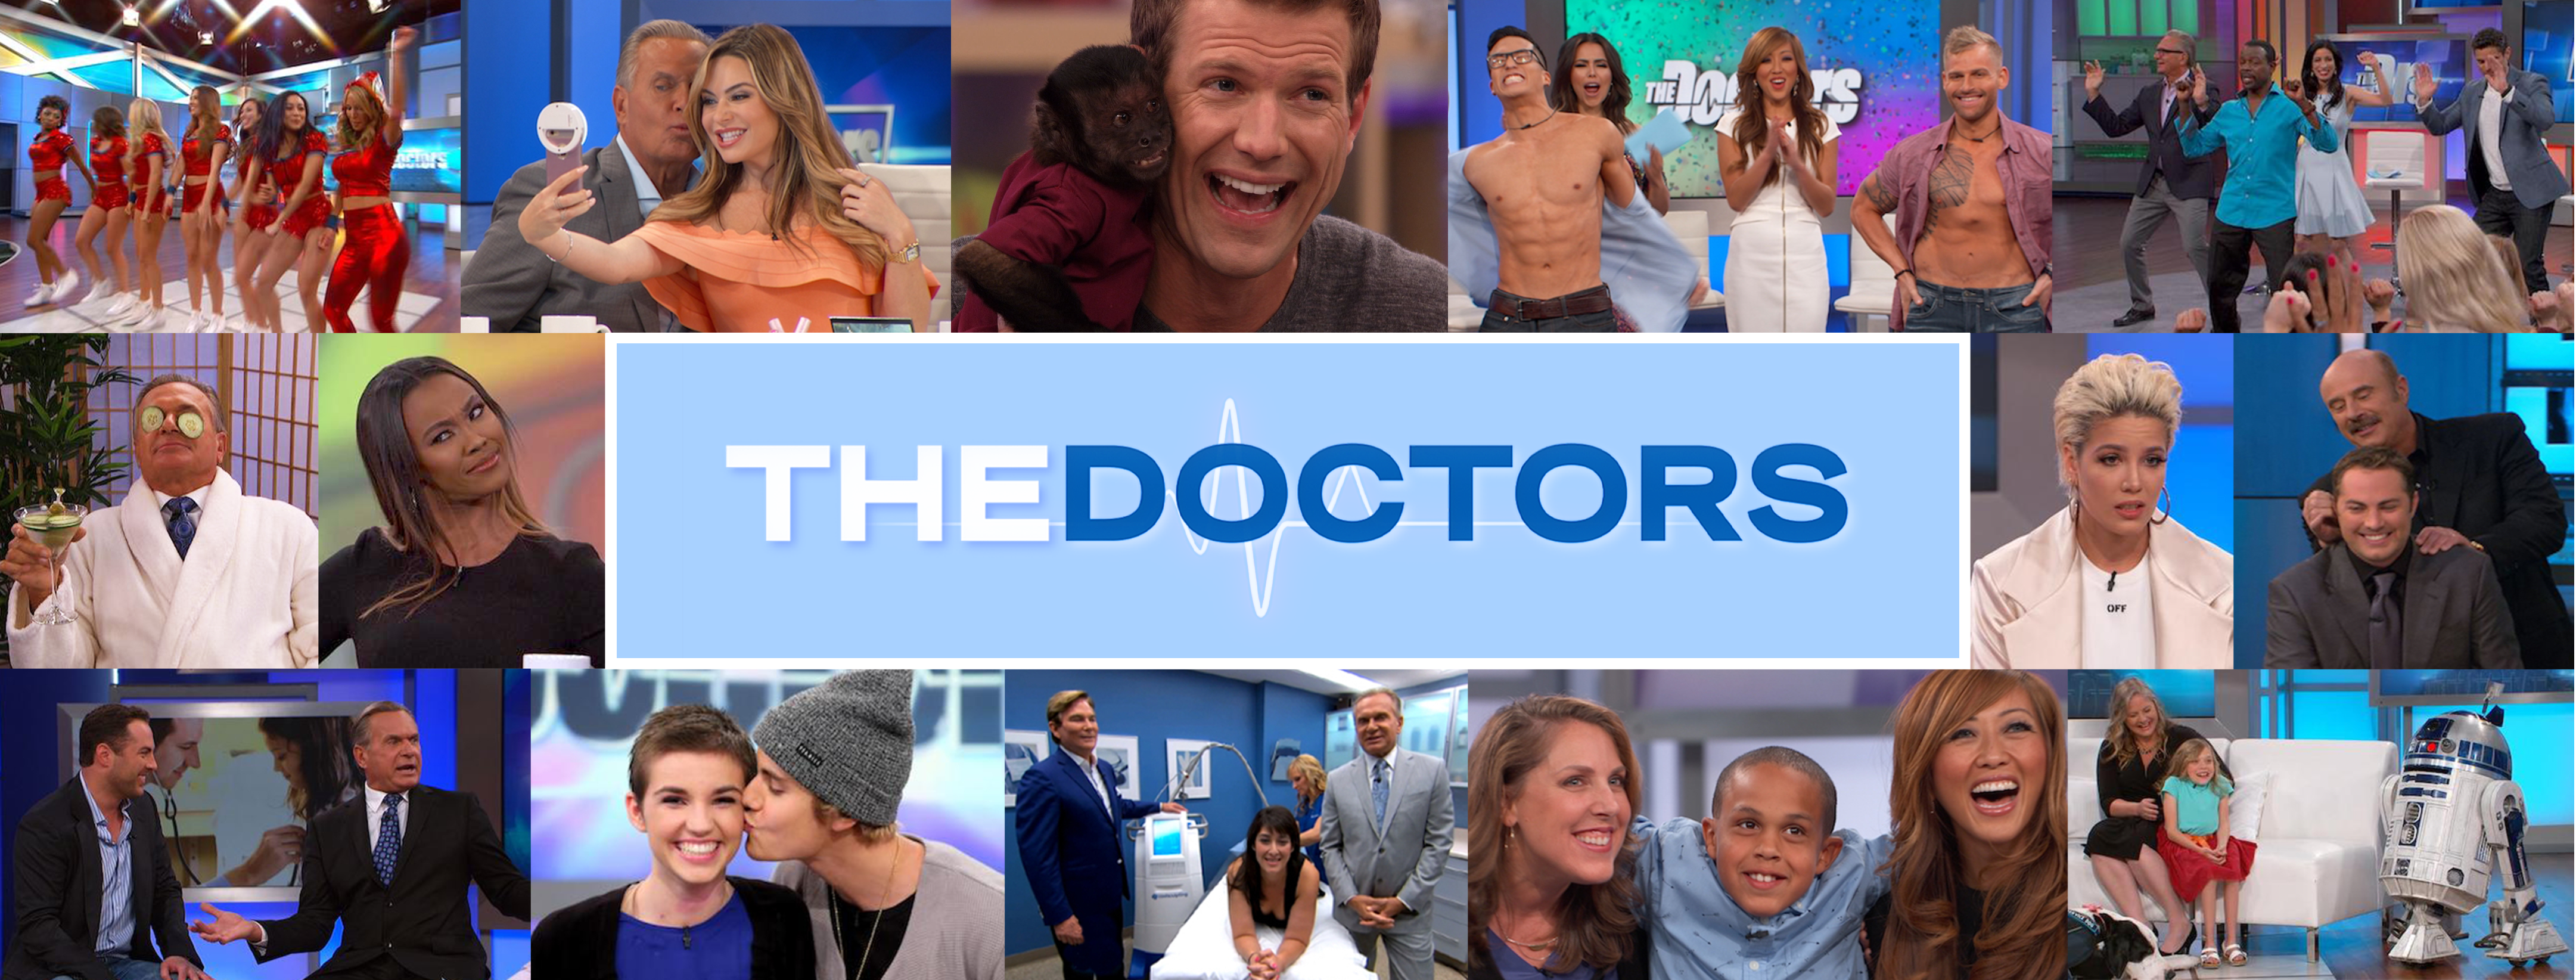 How to Best Prepare for a Disaster during COVID-19 | The Doctors TV Show